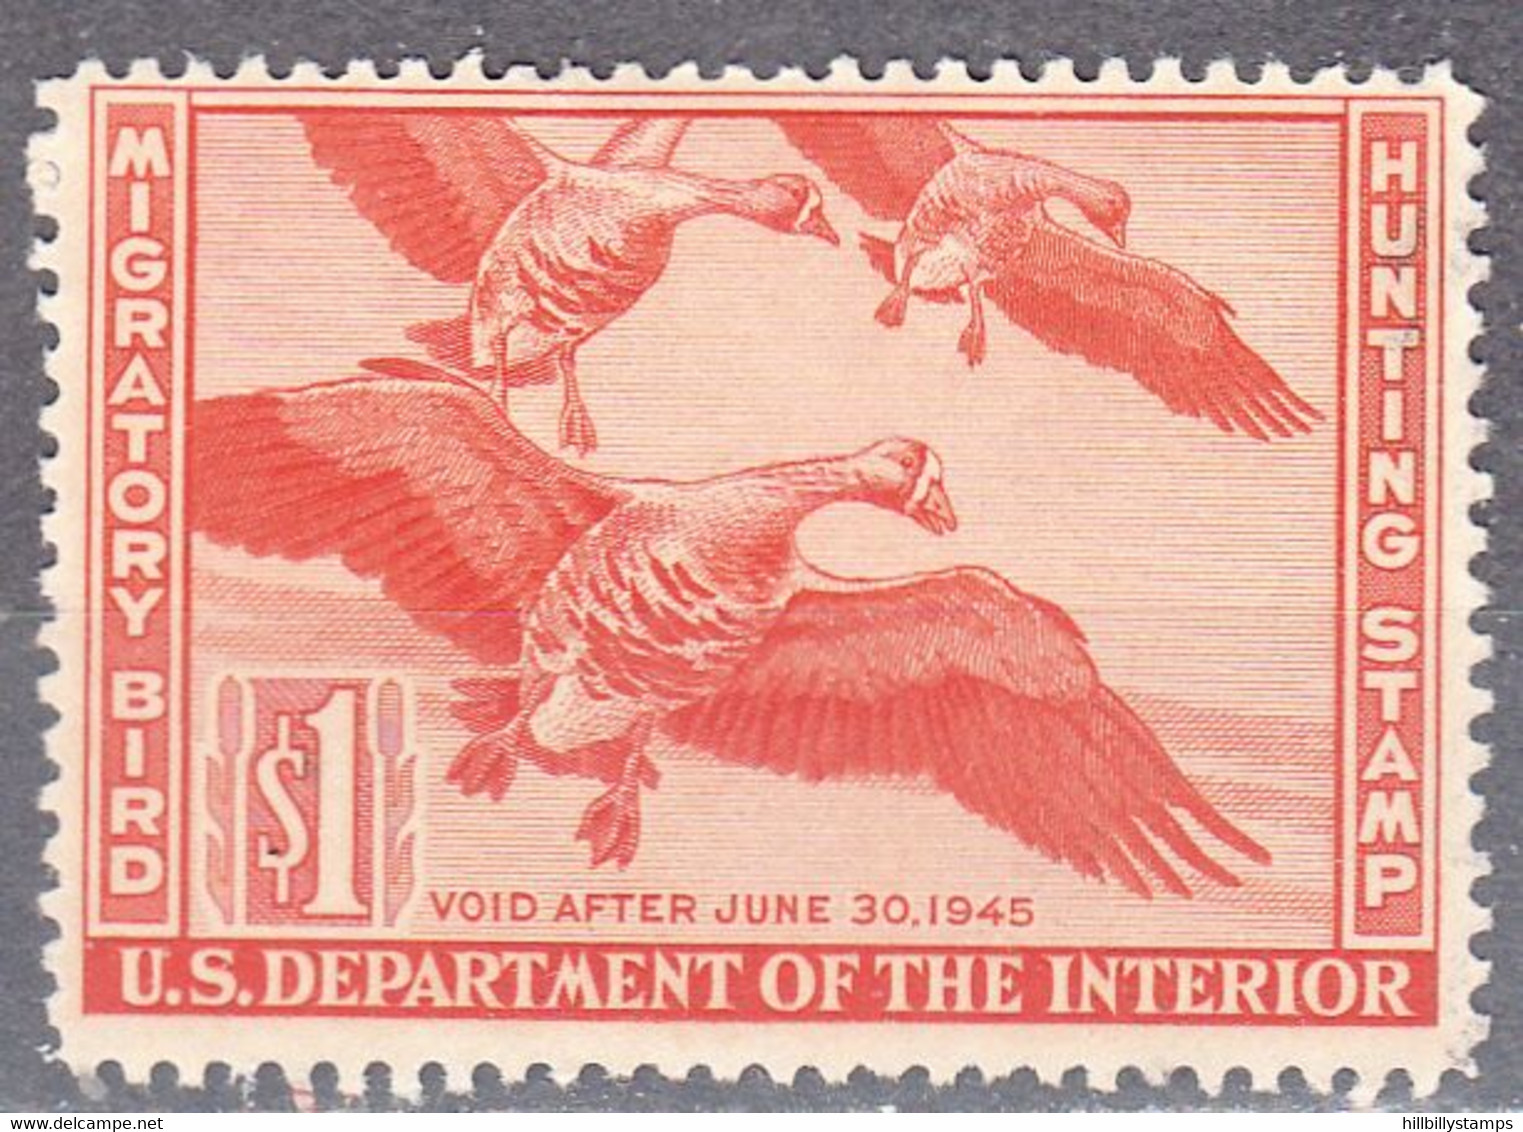 UNITED STATES  SCOTT NO RW11   USED-UNSIGNED  YEAR  1944 - Duck Stamps